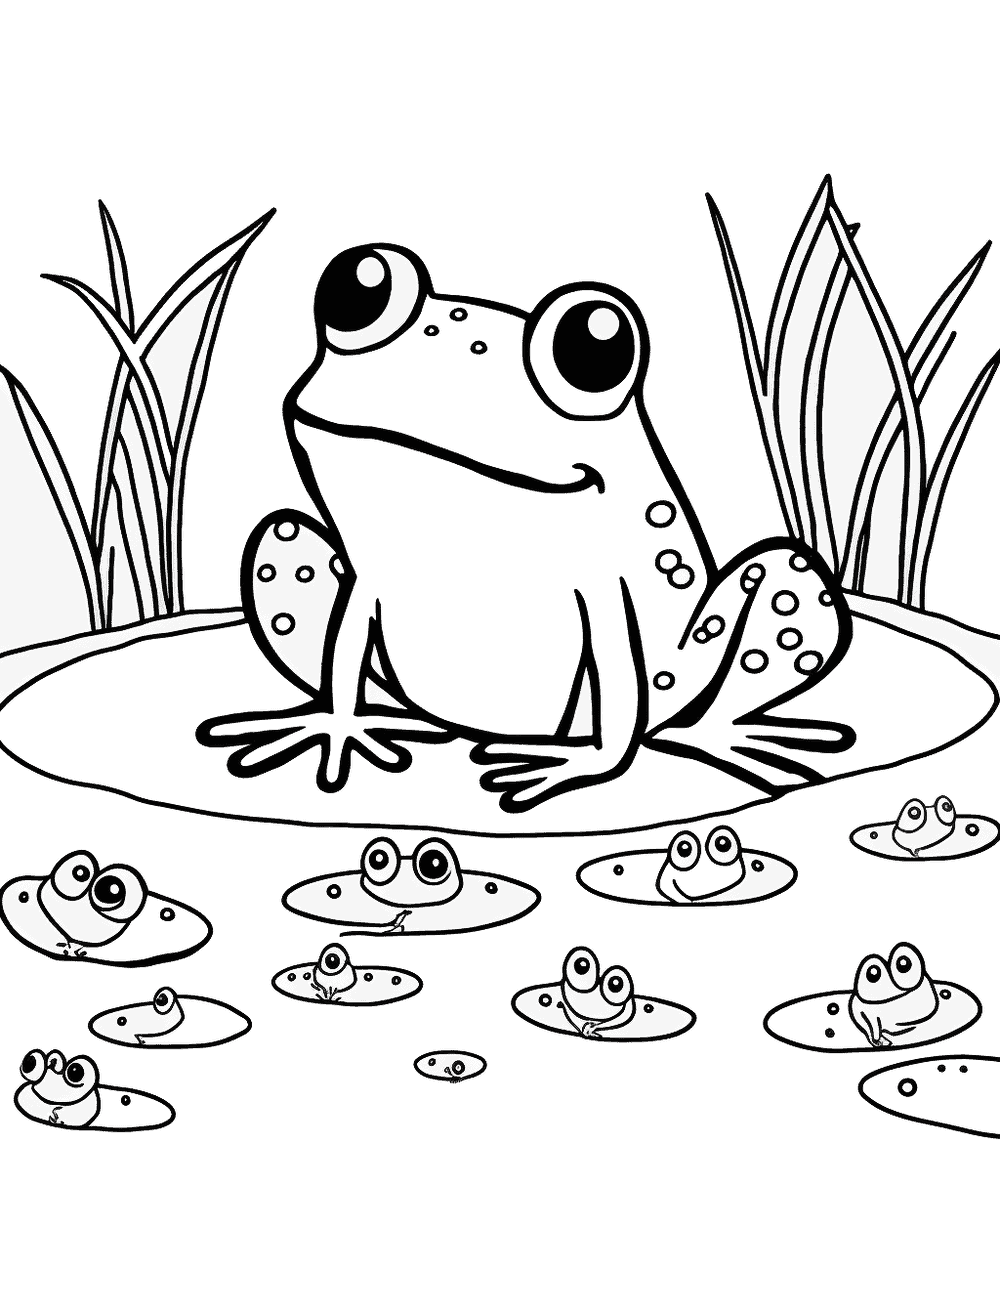 Frogs In a Pond Frog Coloring Page - A group of frogs swimming and playing in a pond.